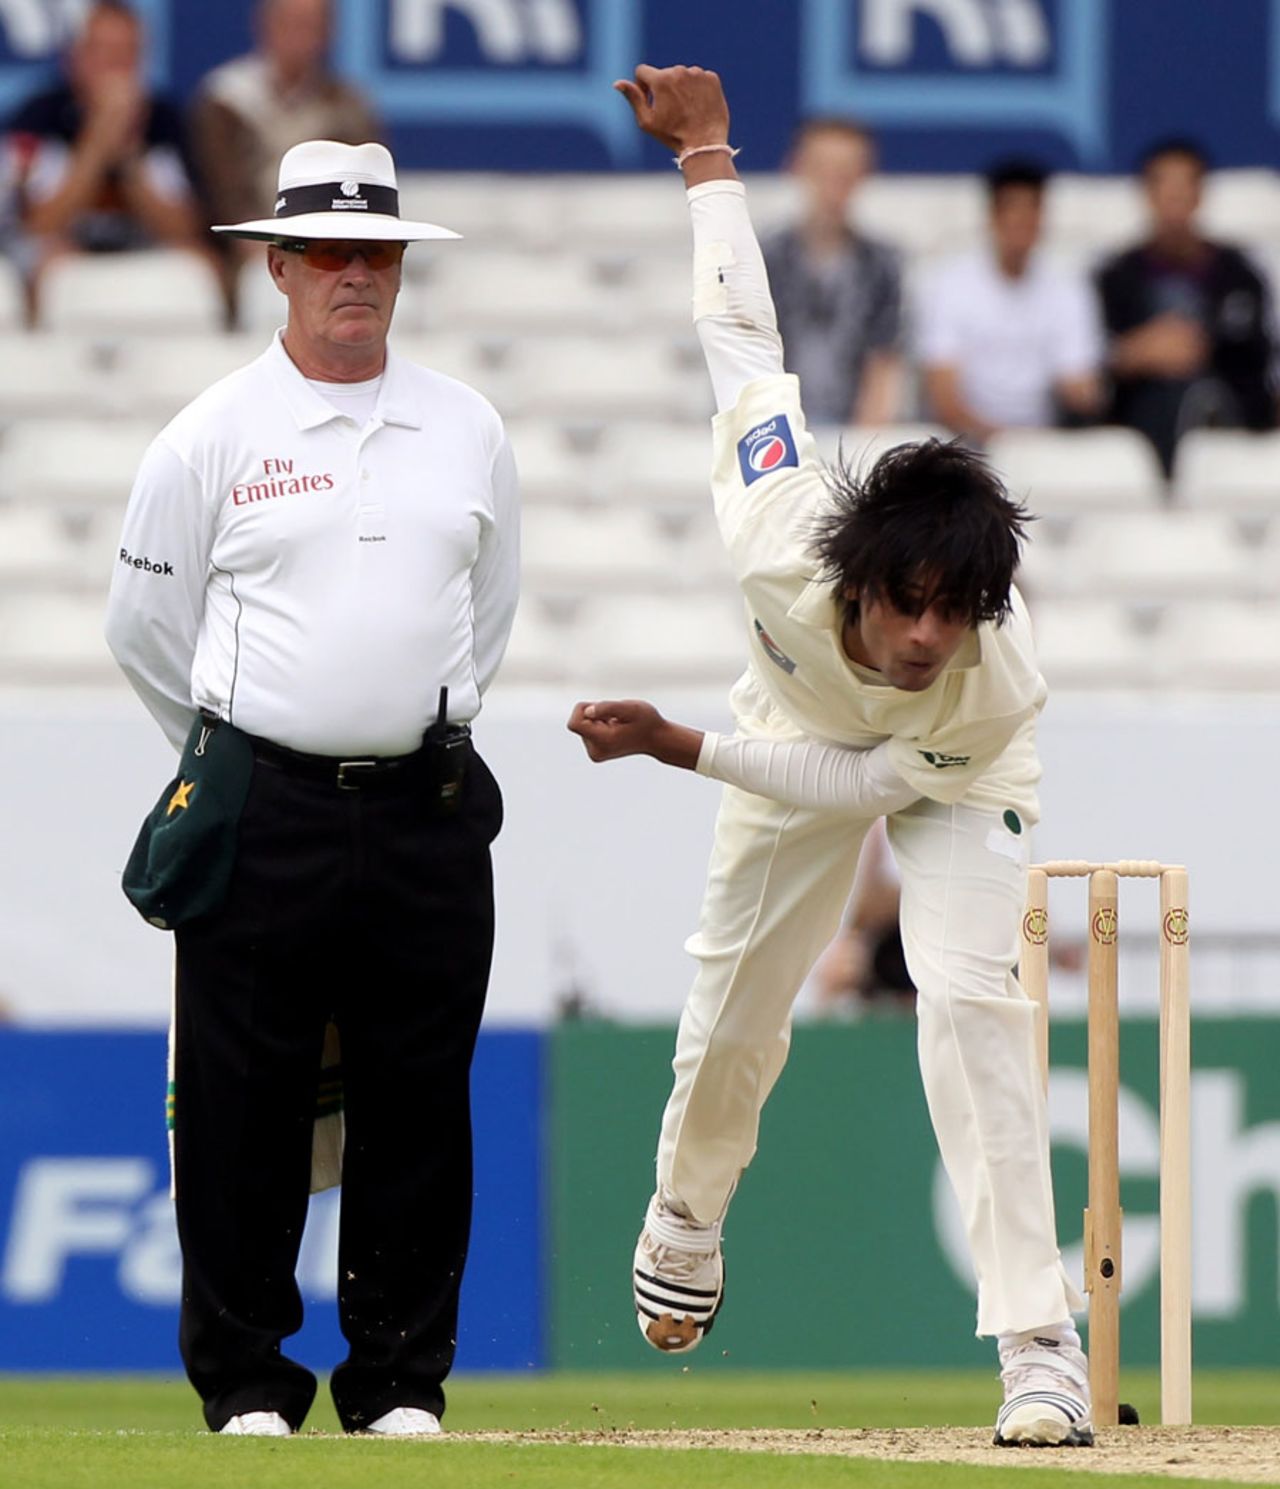 Mohammad Amir bowls during the second Test at Headingley, which will be Rudi Koertzen's last as an umpire, Pakistan v Australia, 2nd Test, Headingley, July 21, 2010